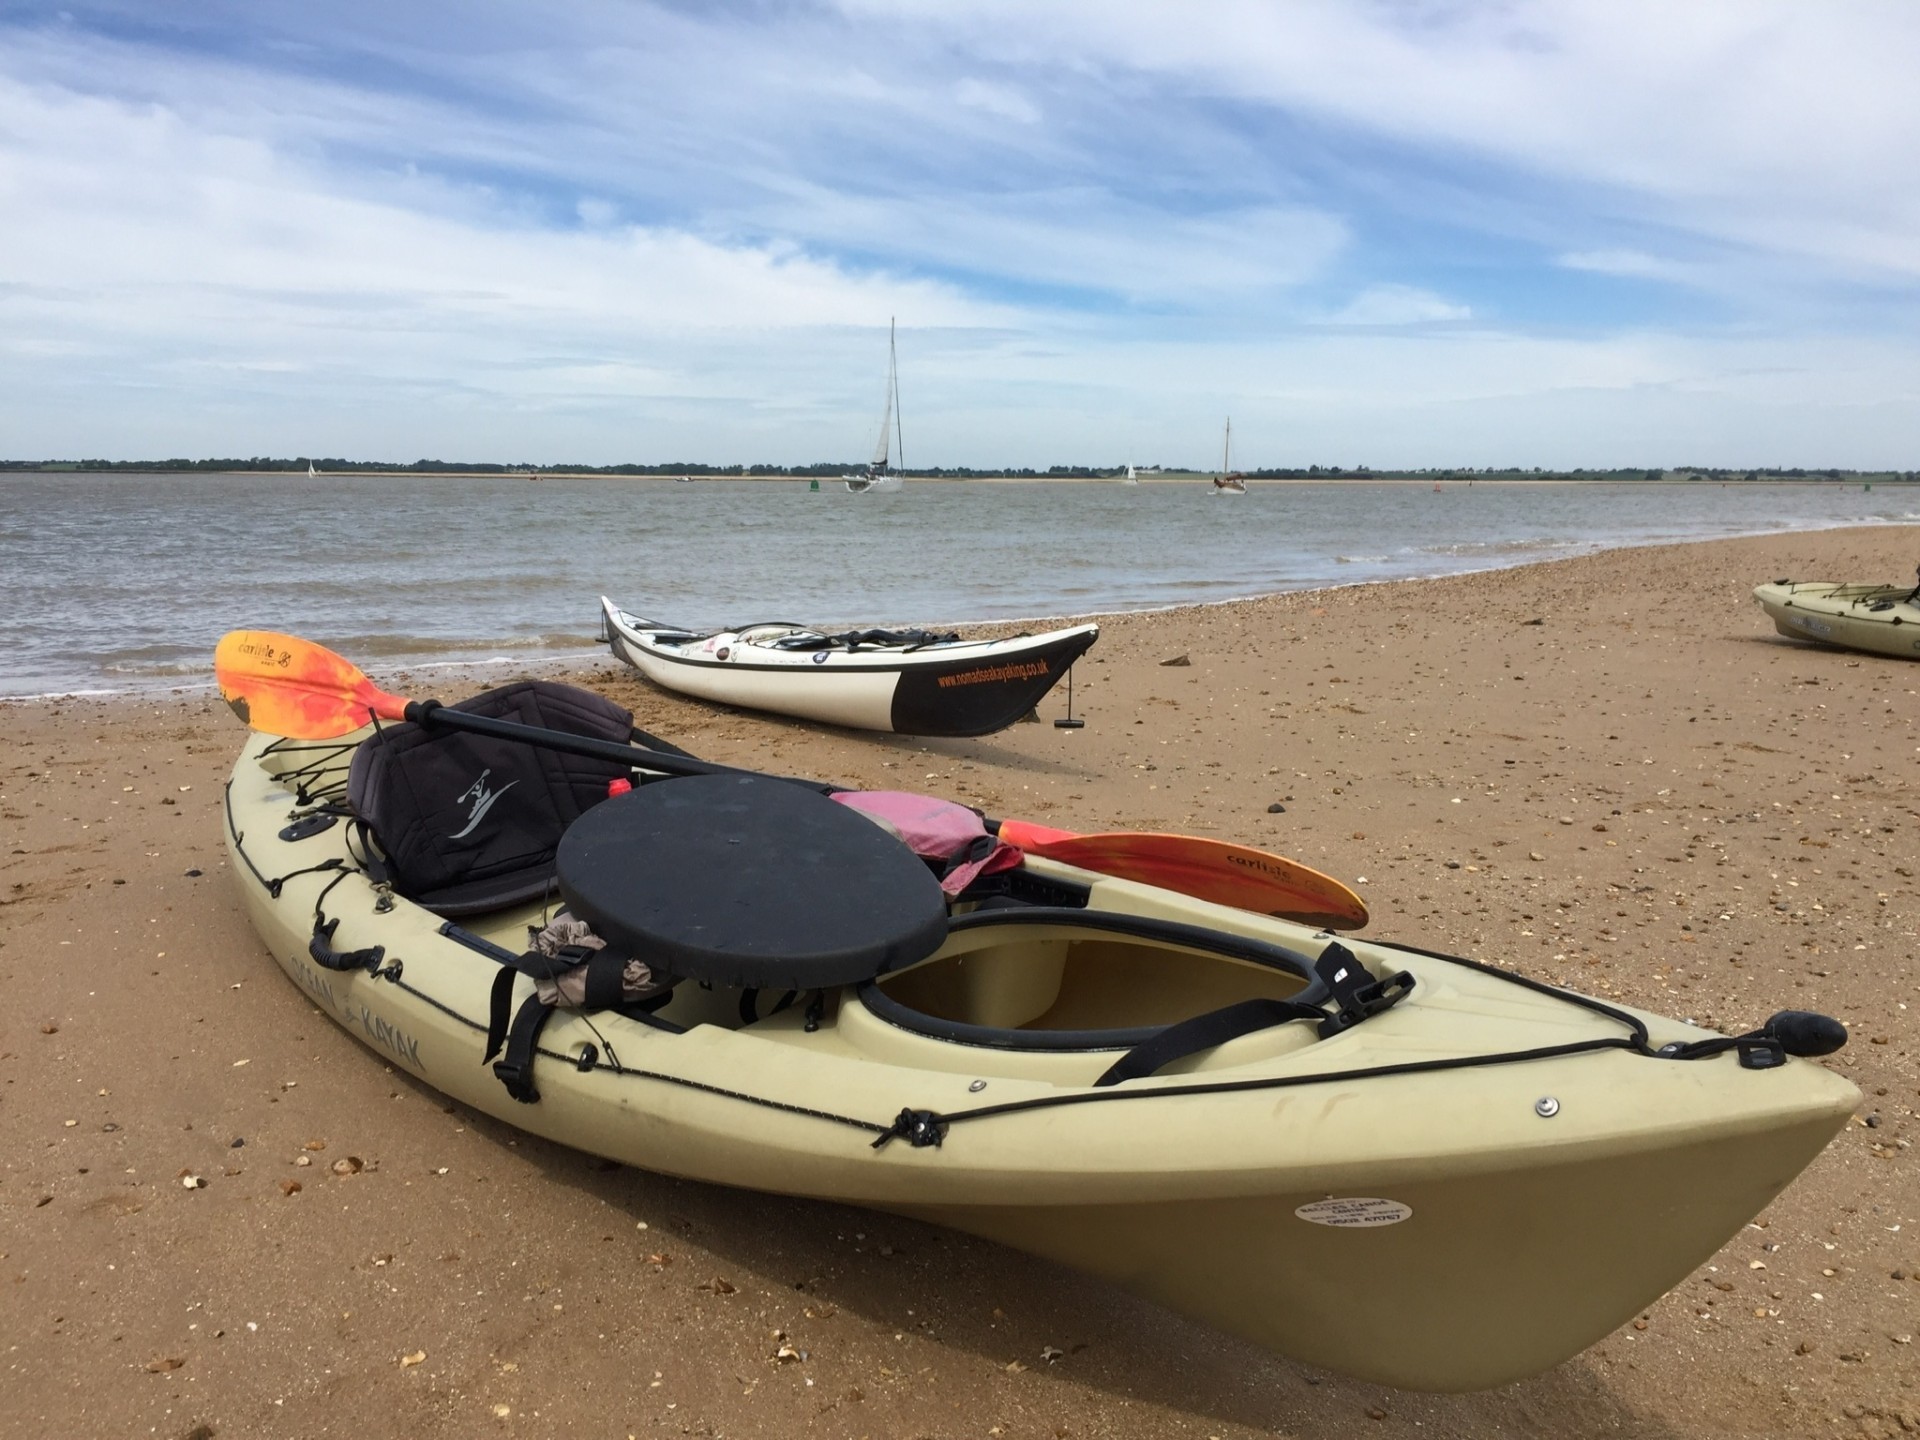 Two Kayaks on the beach with a yacht on the water in the background